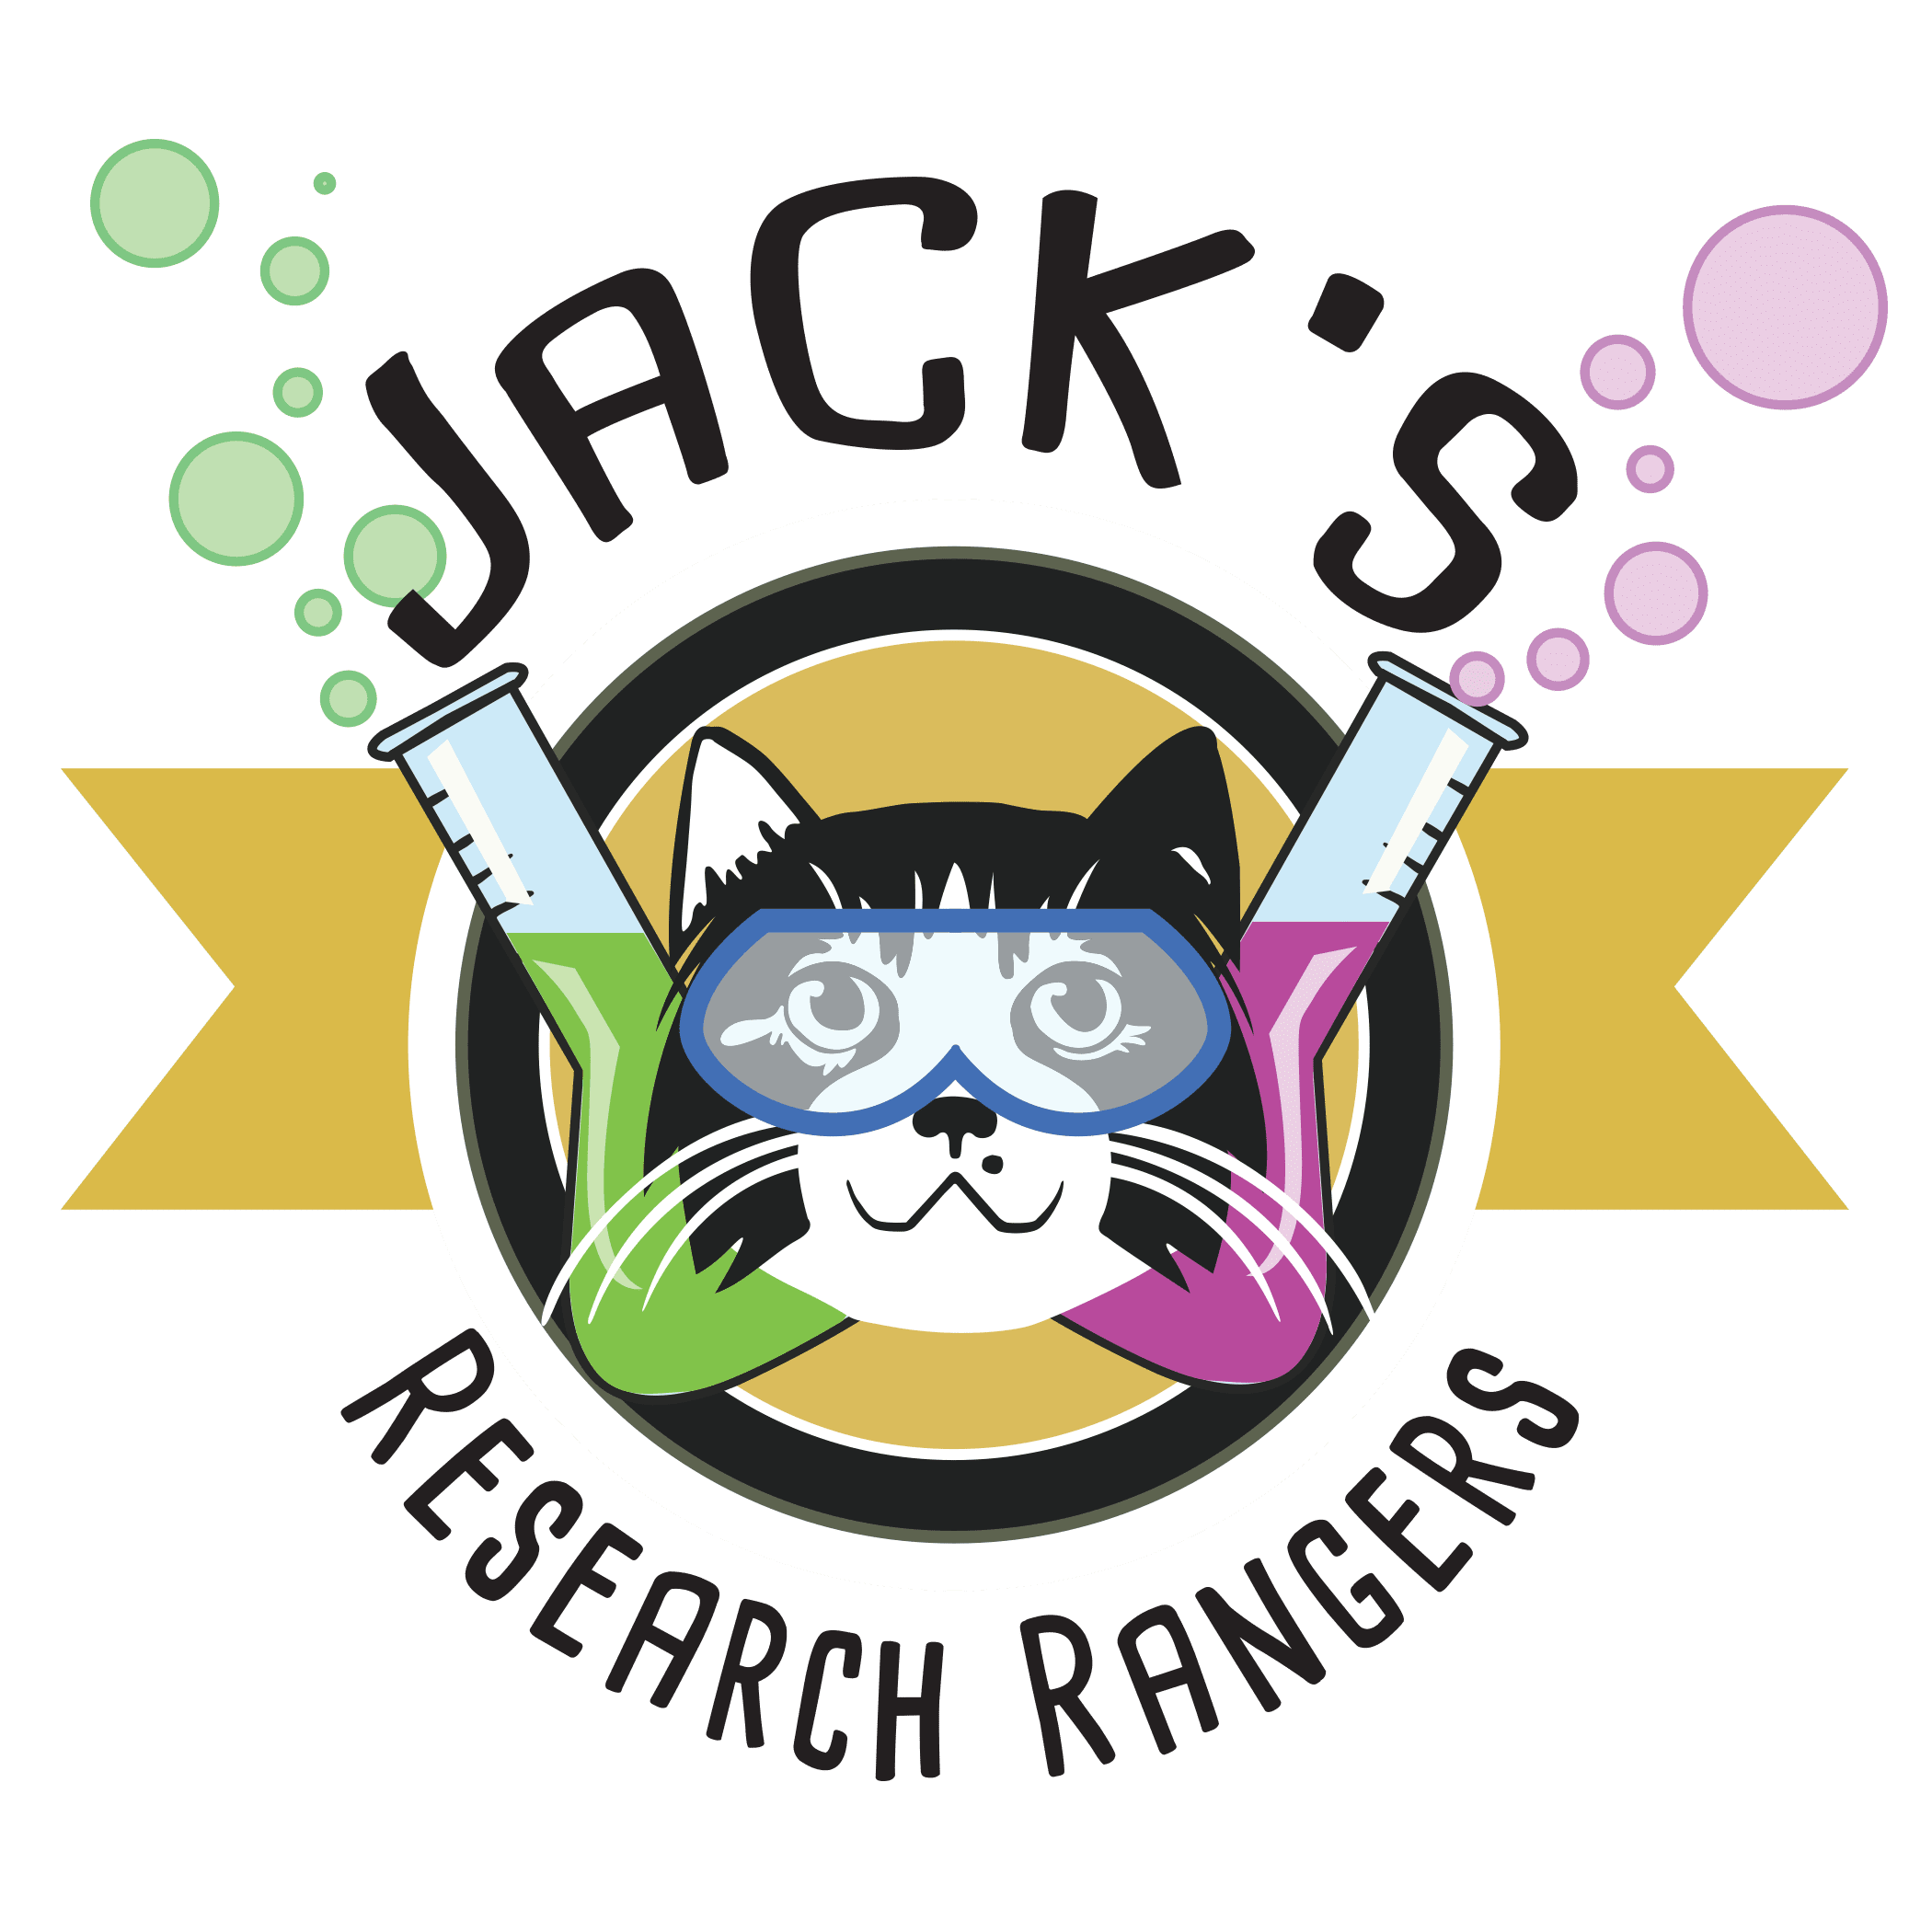 Read more about the article Jack’s Research Rangers: Episode 2 | Deer Ridge Farms